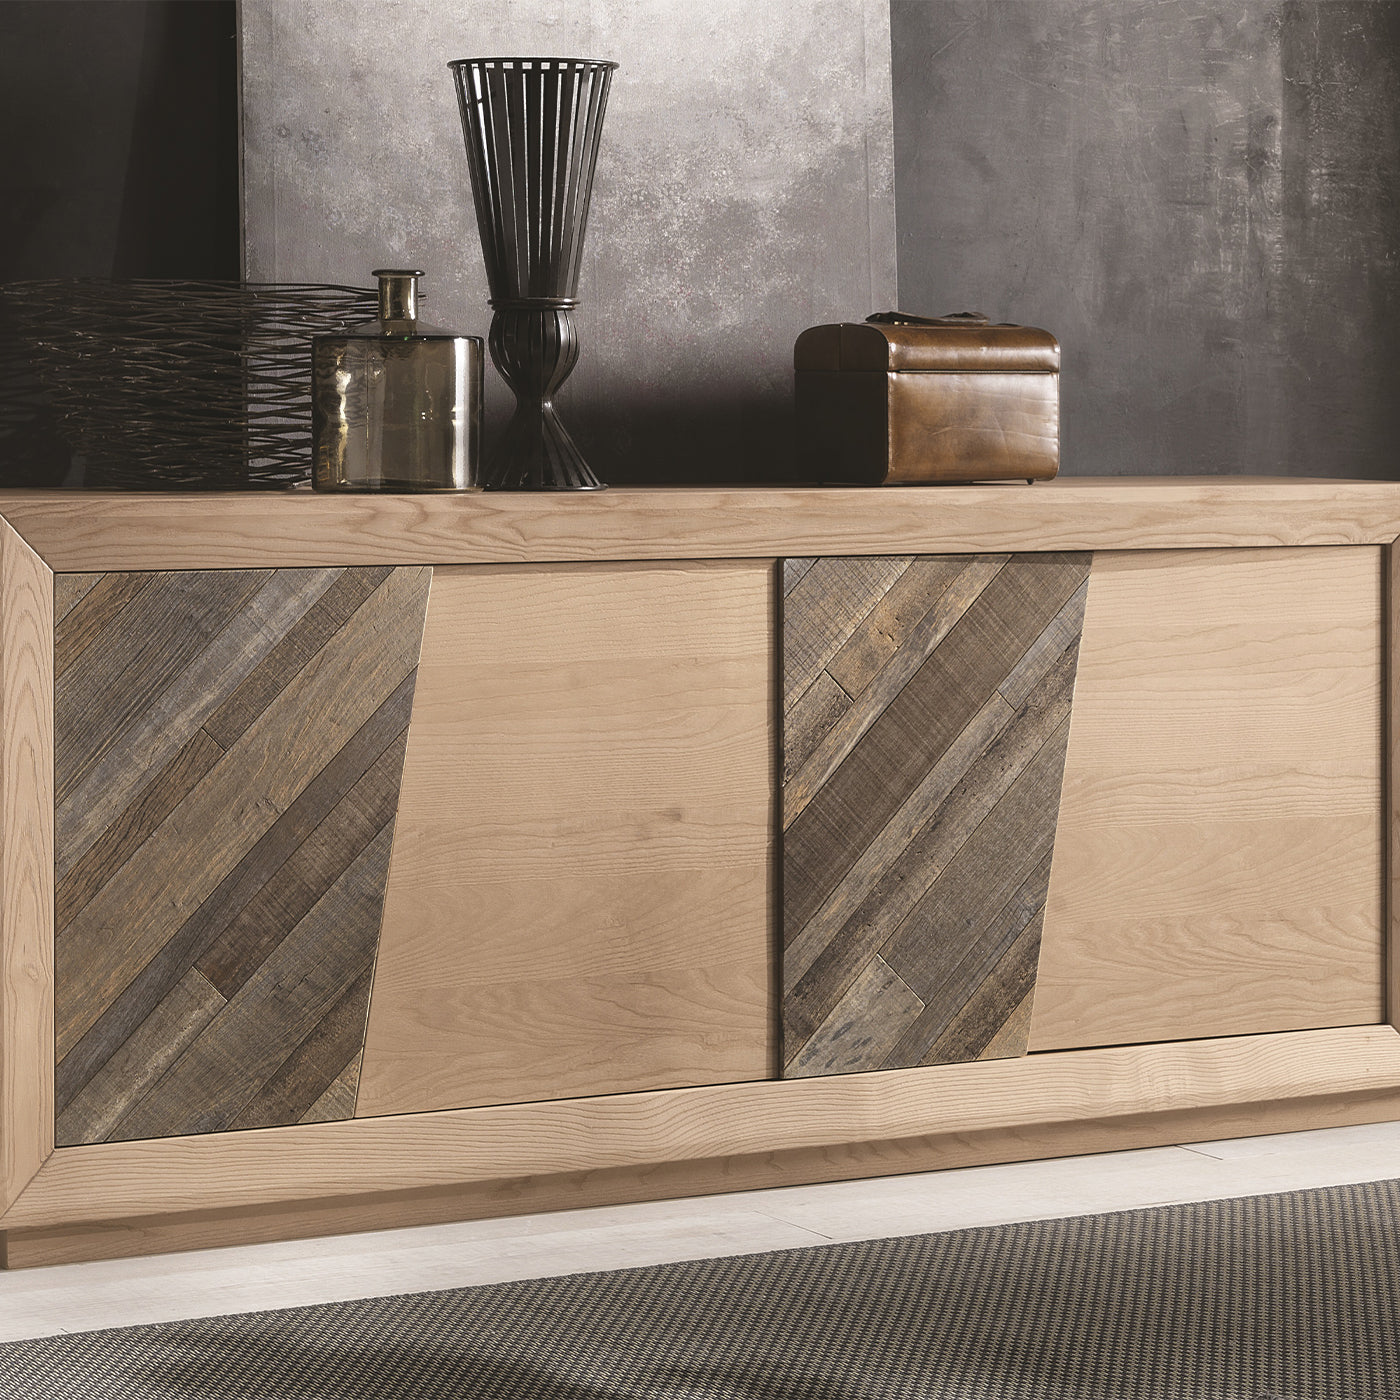 4-Door Ash Sideboard with Old Wood Inserts - Alternative view 1